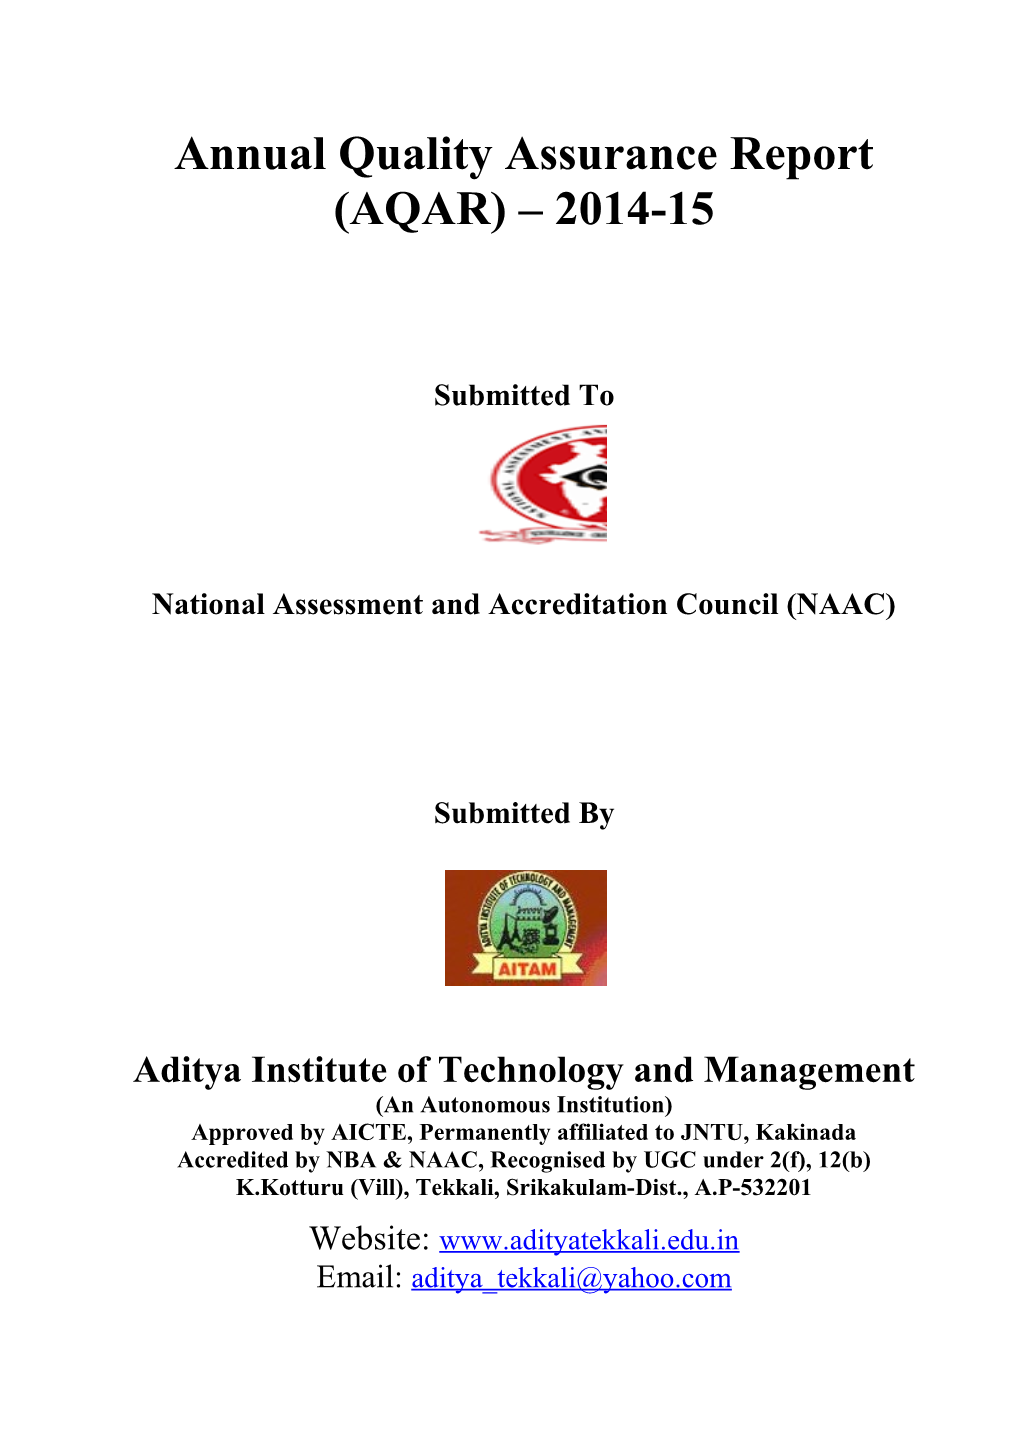 Annual Quality Assurance Report s1